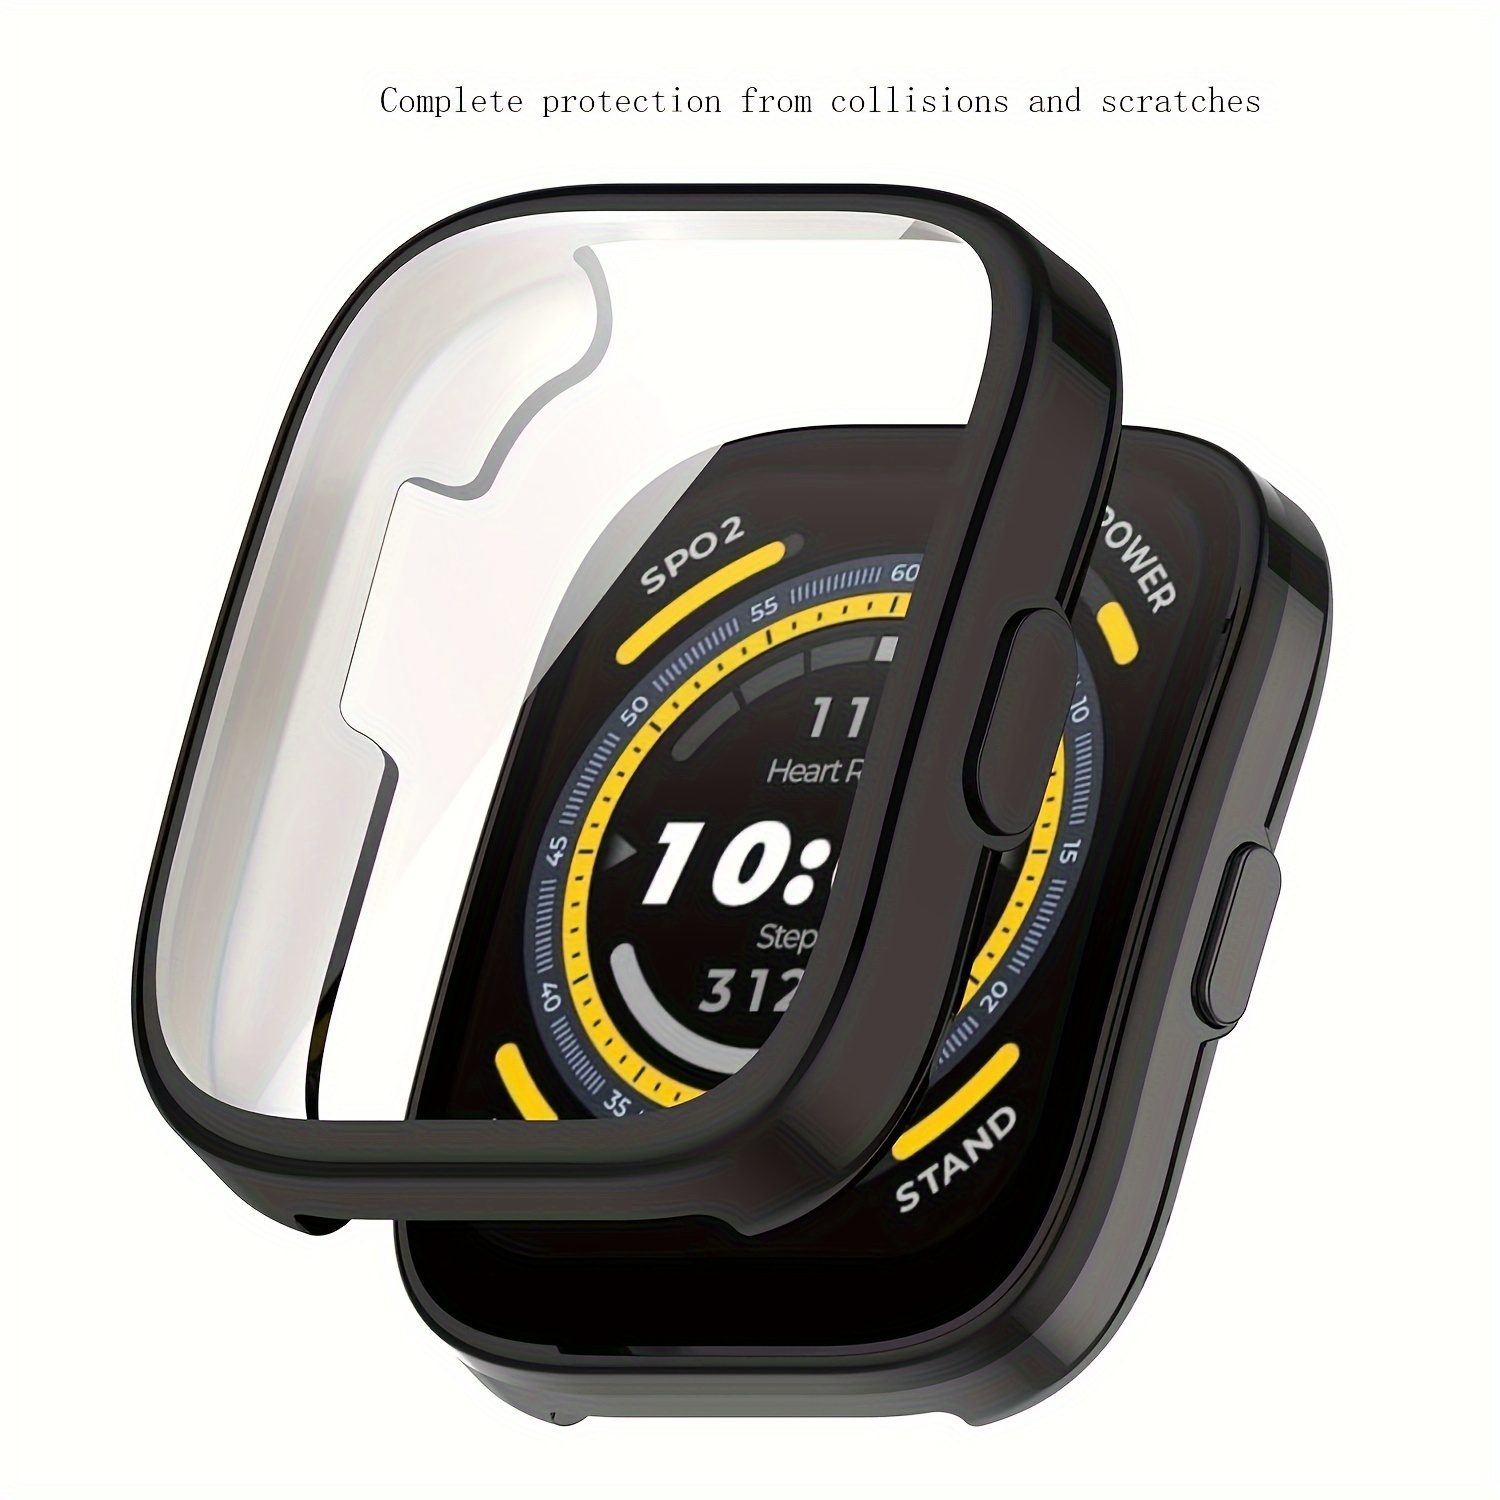 Protective Case Compatible for Amazfit Bip 5 Screen Protector, All-Around  Case Tempered Glass Bumper Full Cover Shell Coverage Cases for Amazfit Bip5  Smartwatch Accessory (3 Pack A) : Cell Phones & Accessories 